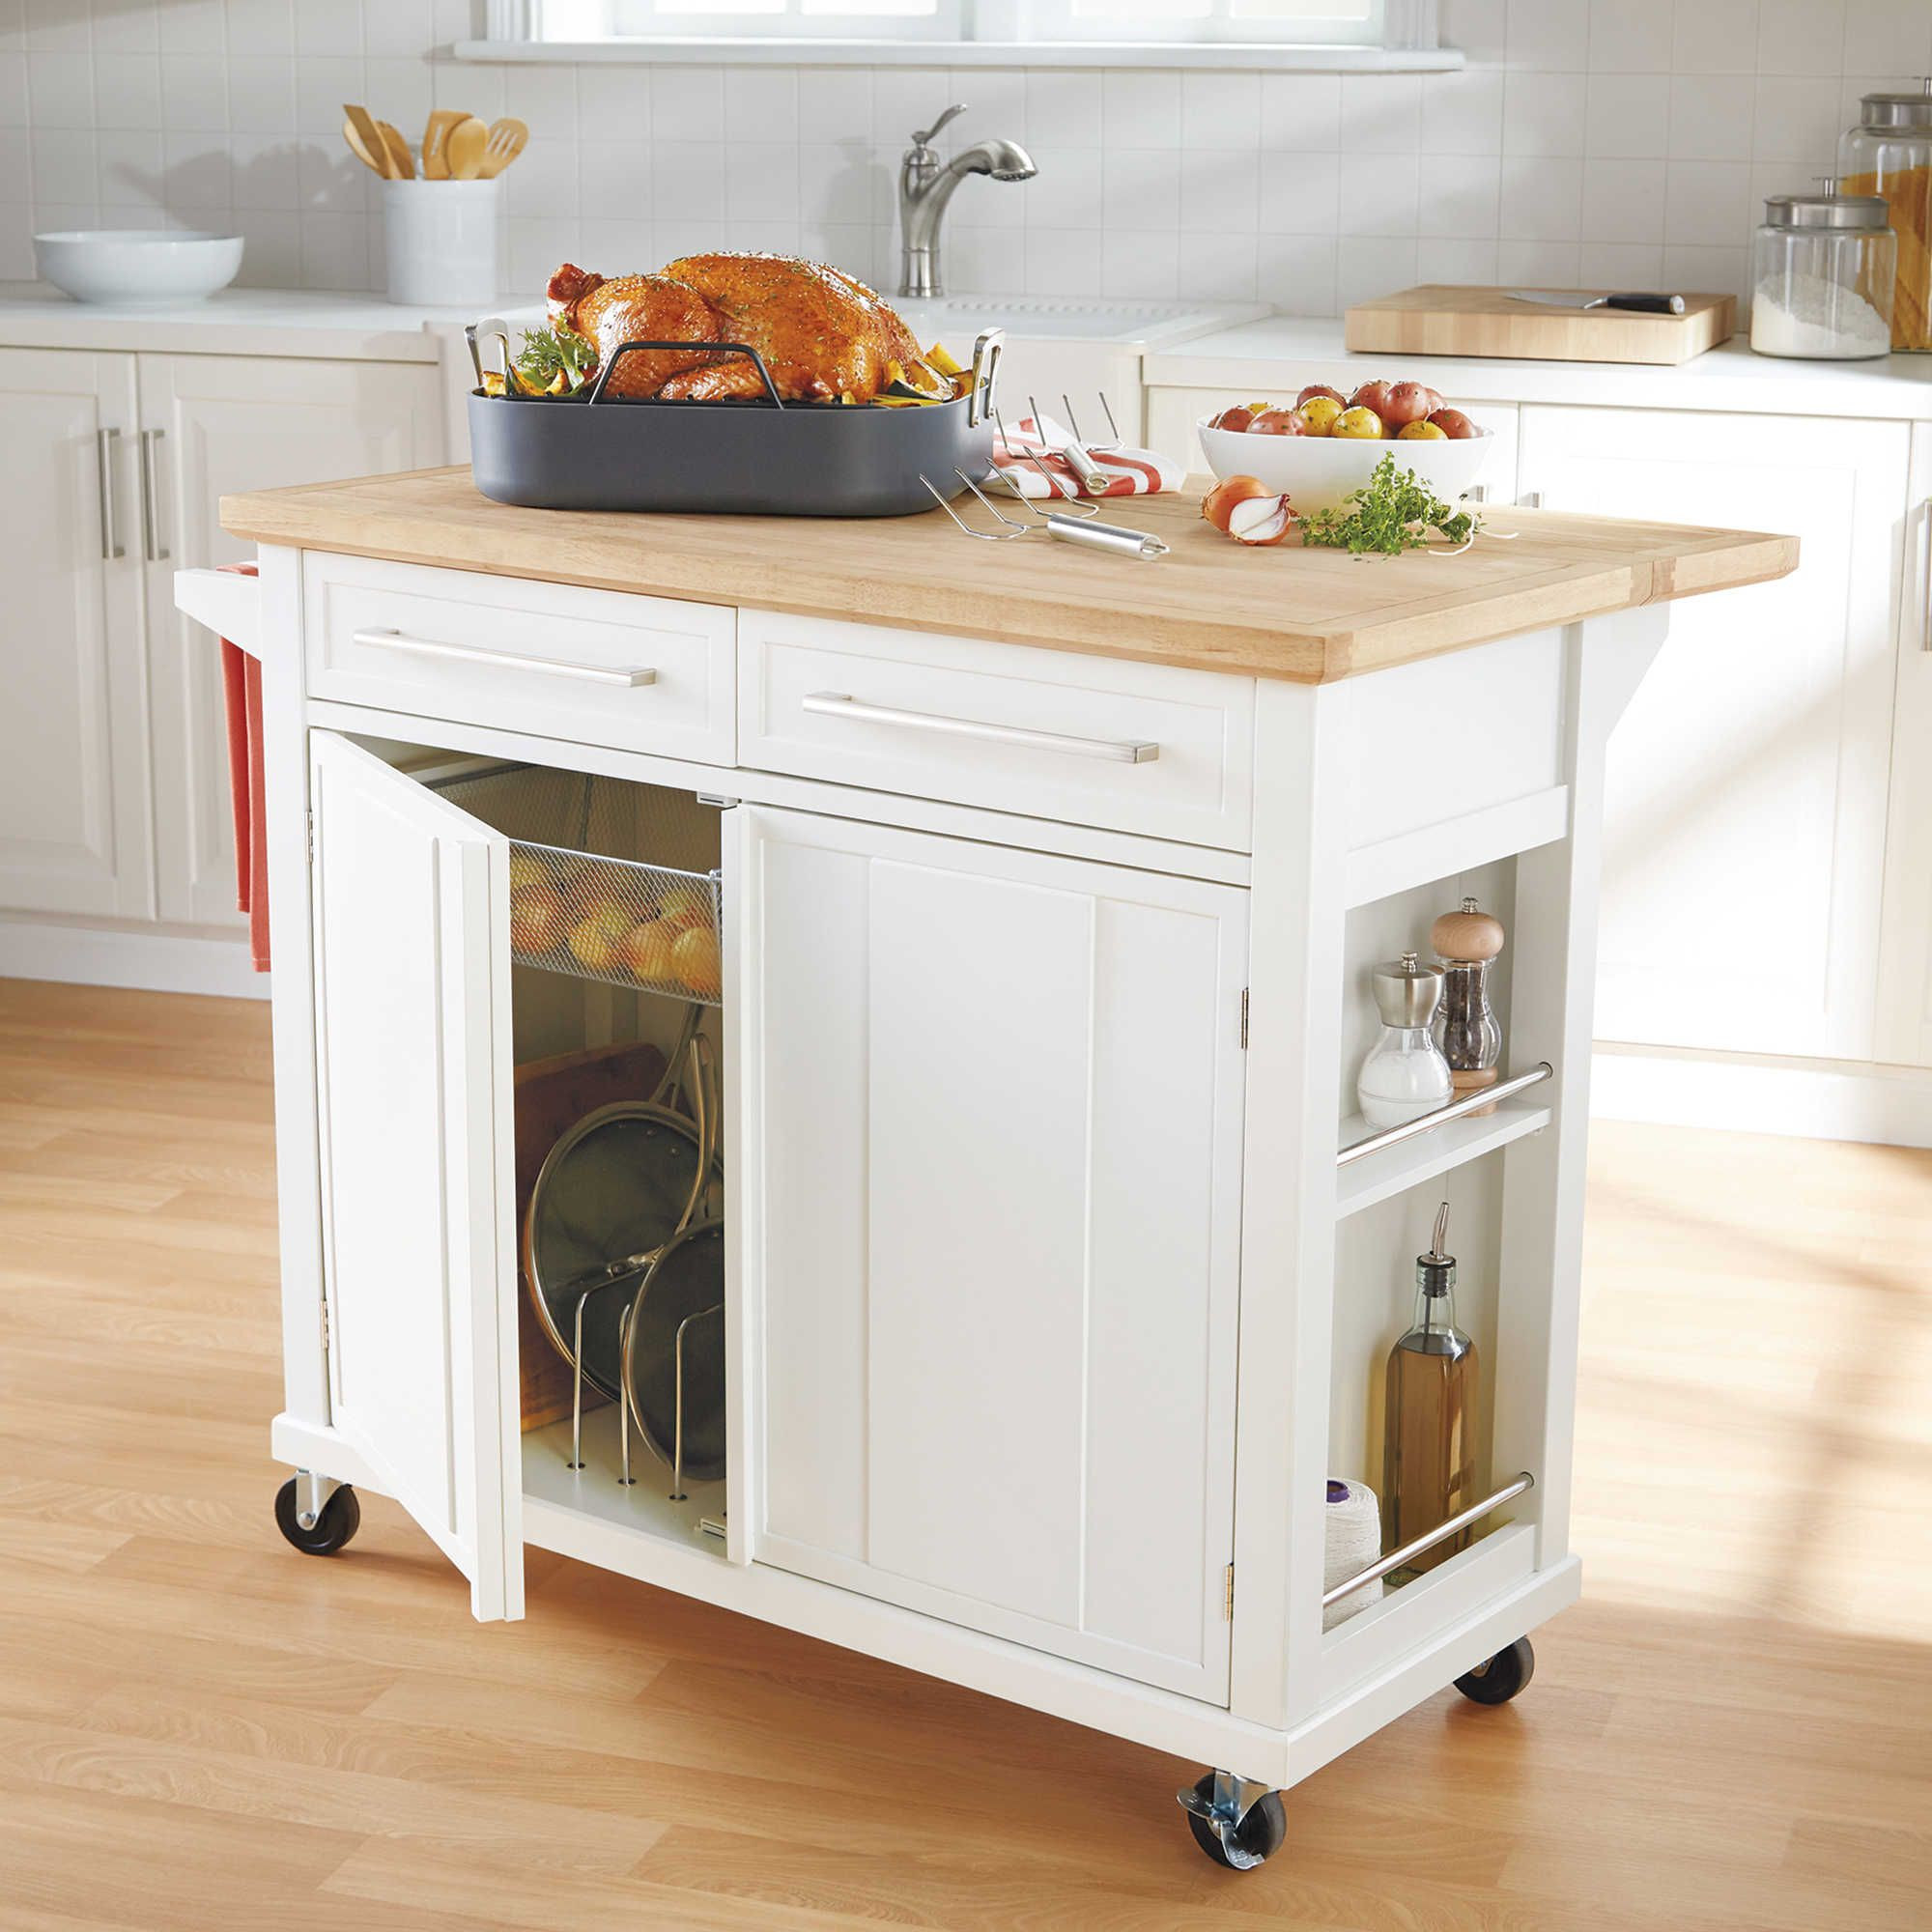 Small Rolling Kitchen Island
 Real Simple Rolling Kitchen Island in White $300 bed bath